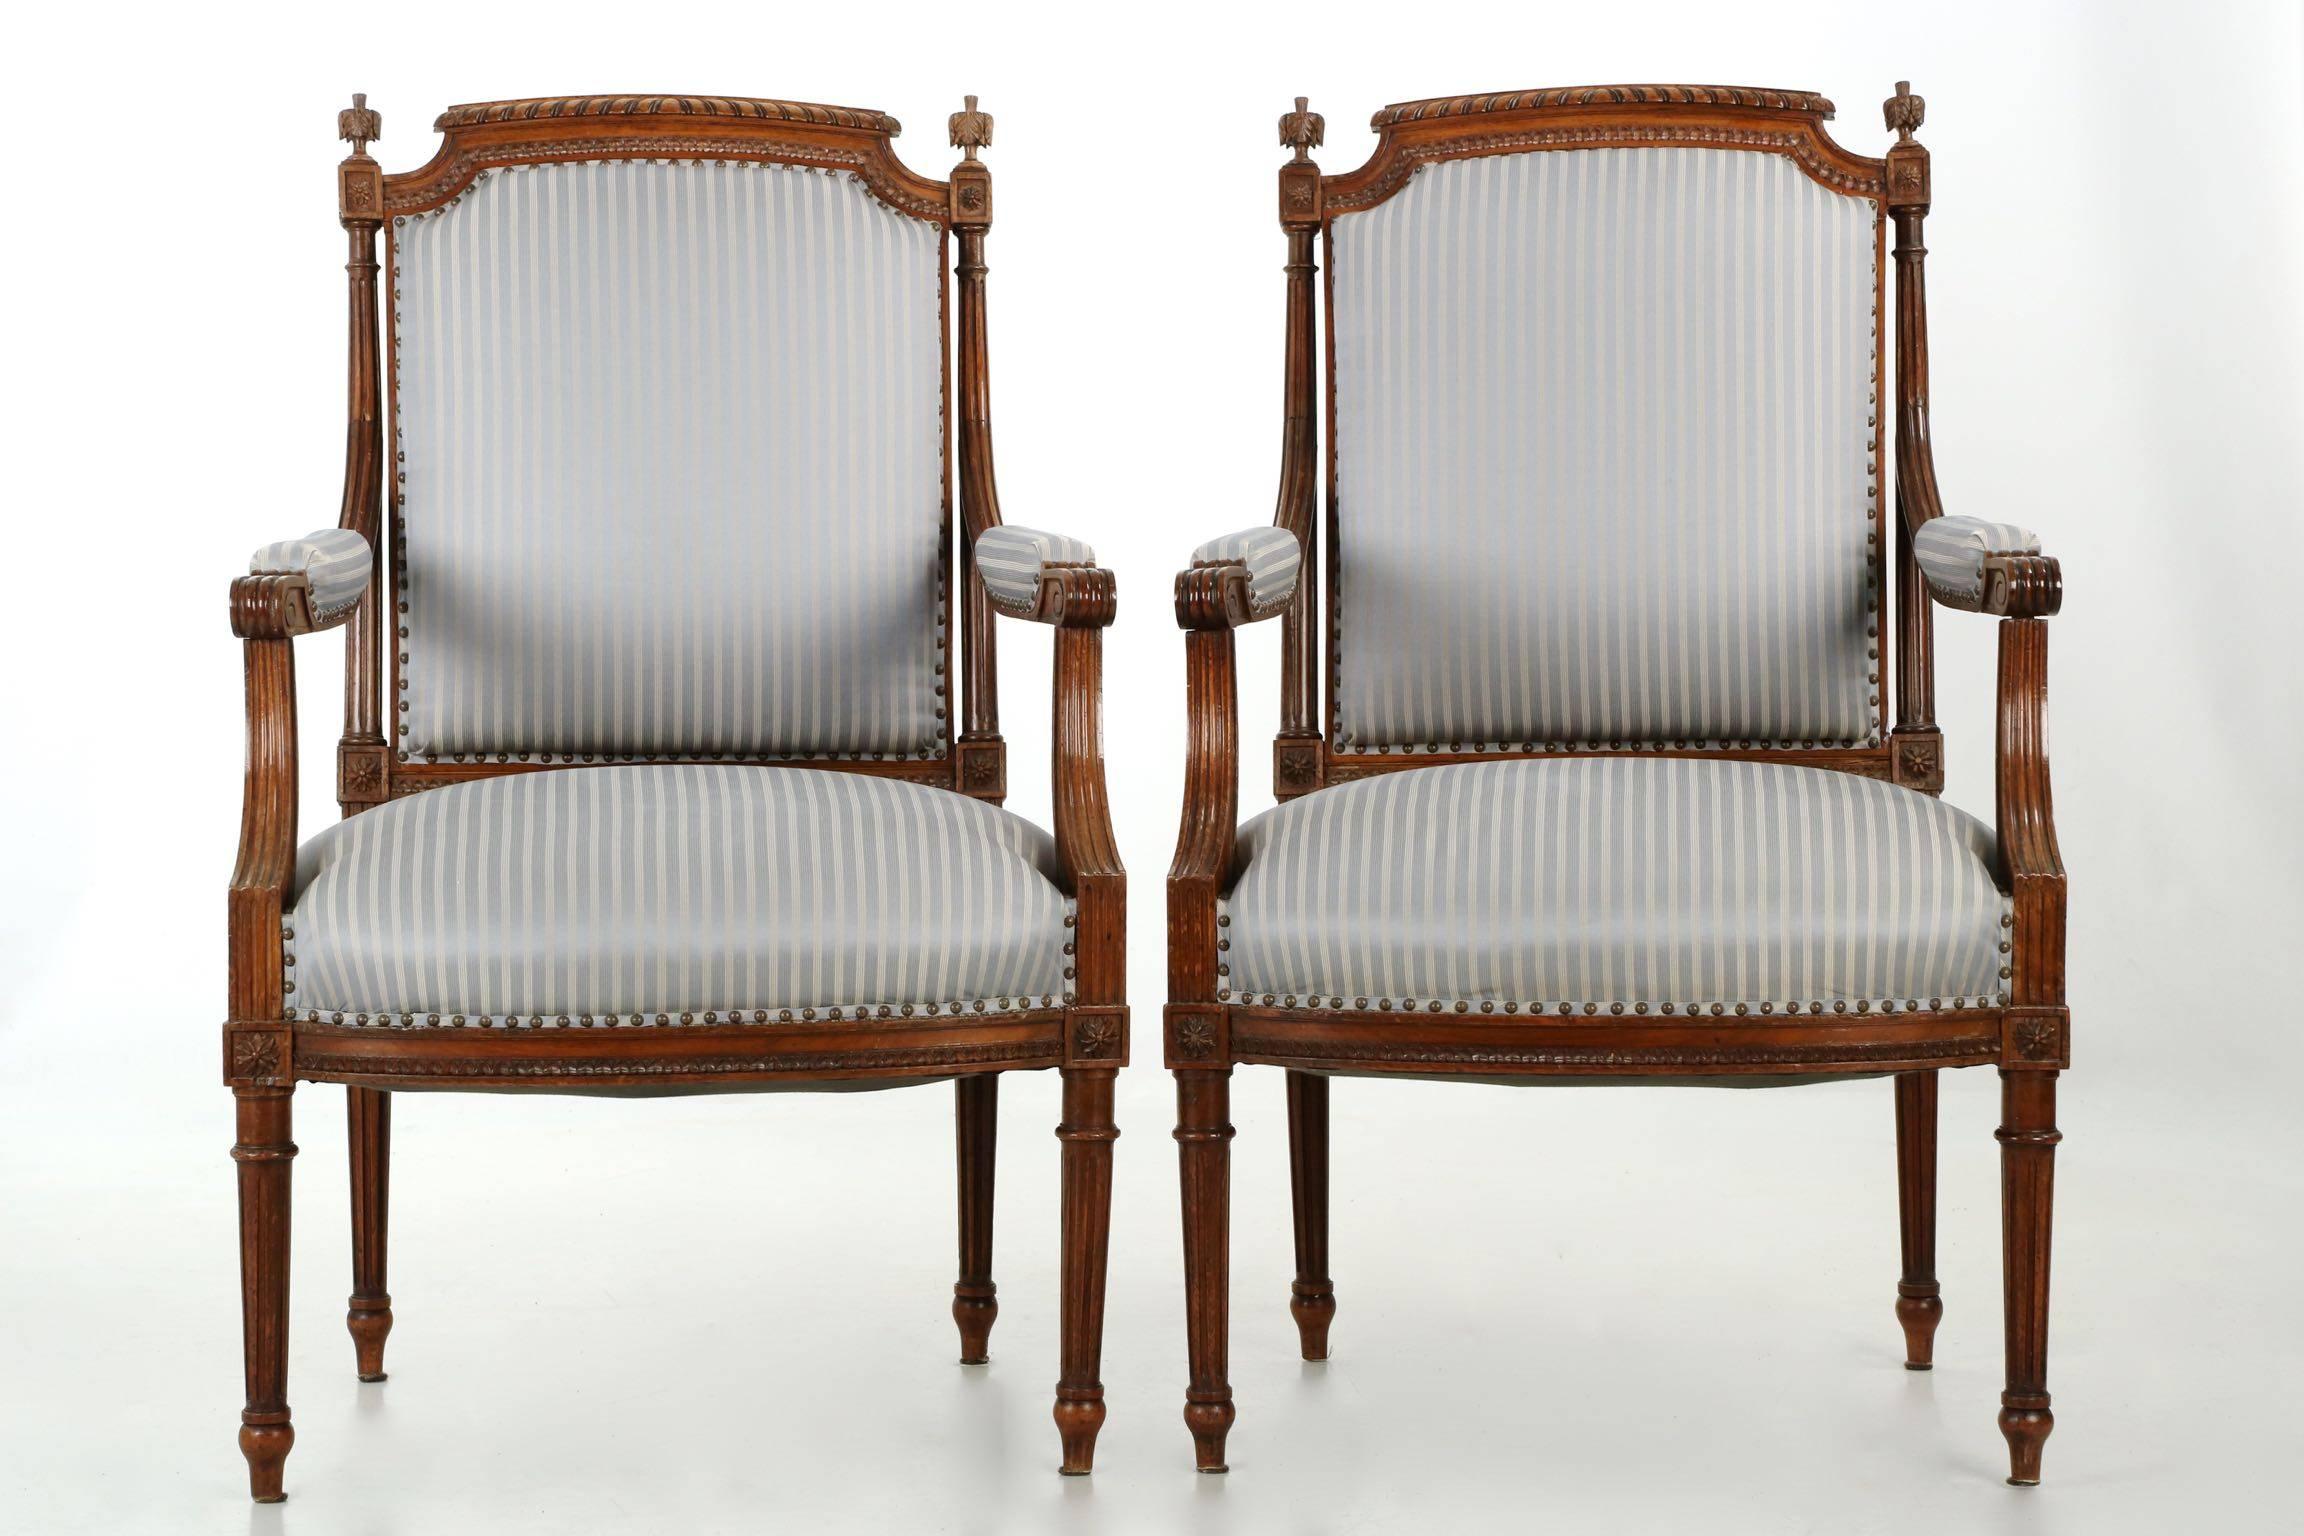 A most attractive pair of arm chairs in the Louis XVI taste crafted during the first quarter of the 20th century, both are carved of a dense walnut and retain early and beautifully patinated surfaces. The crest rail has a carved gadrooning across